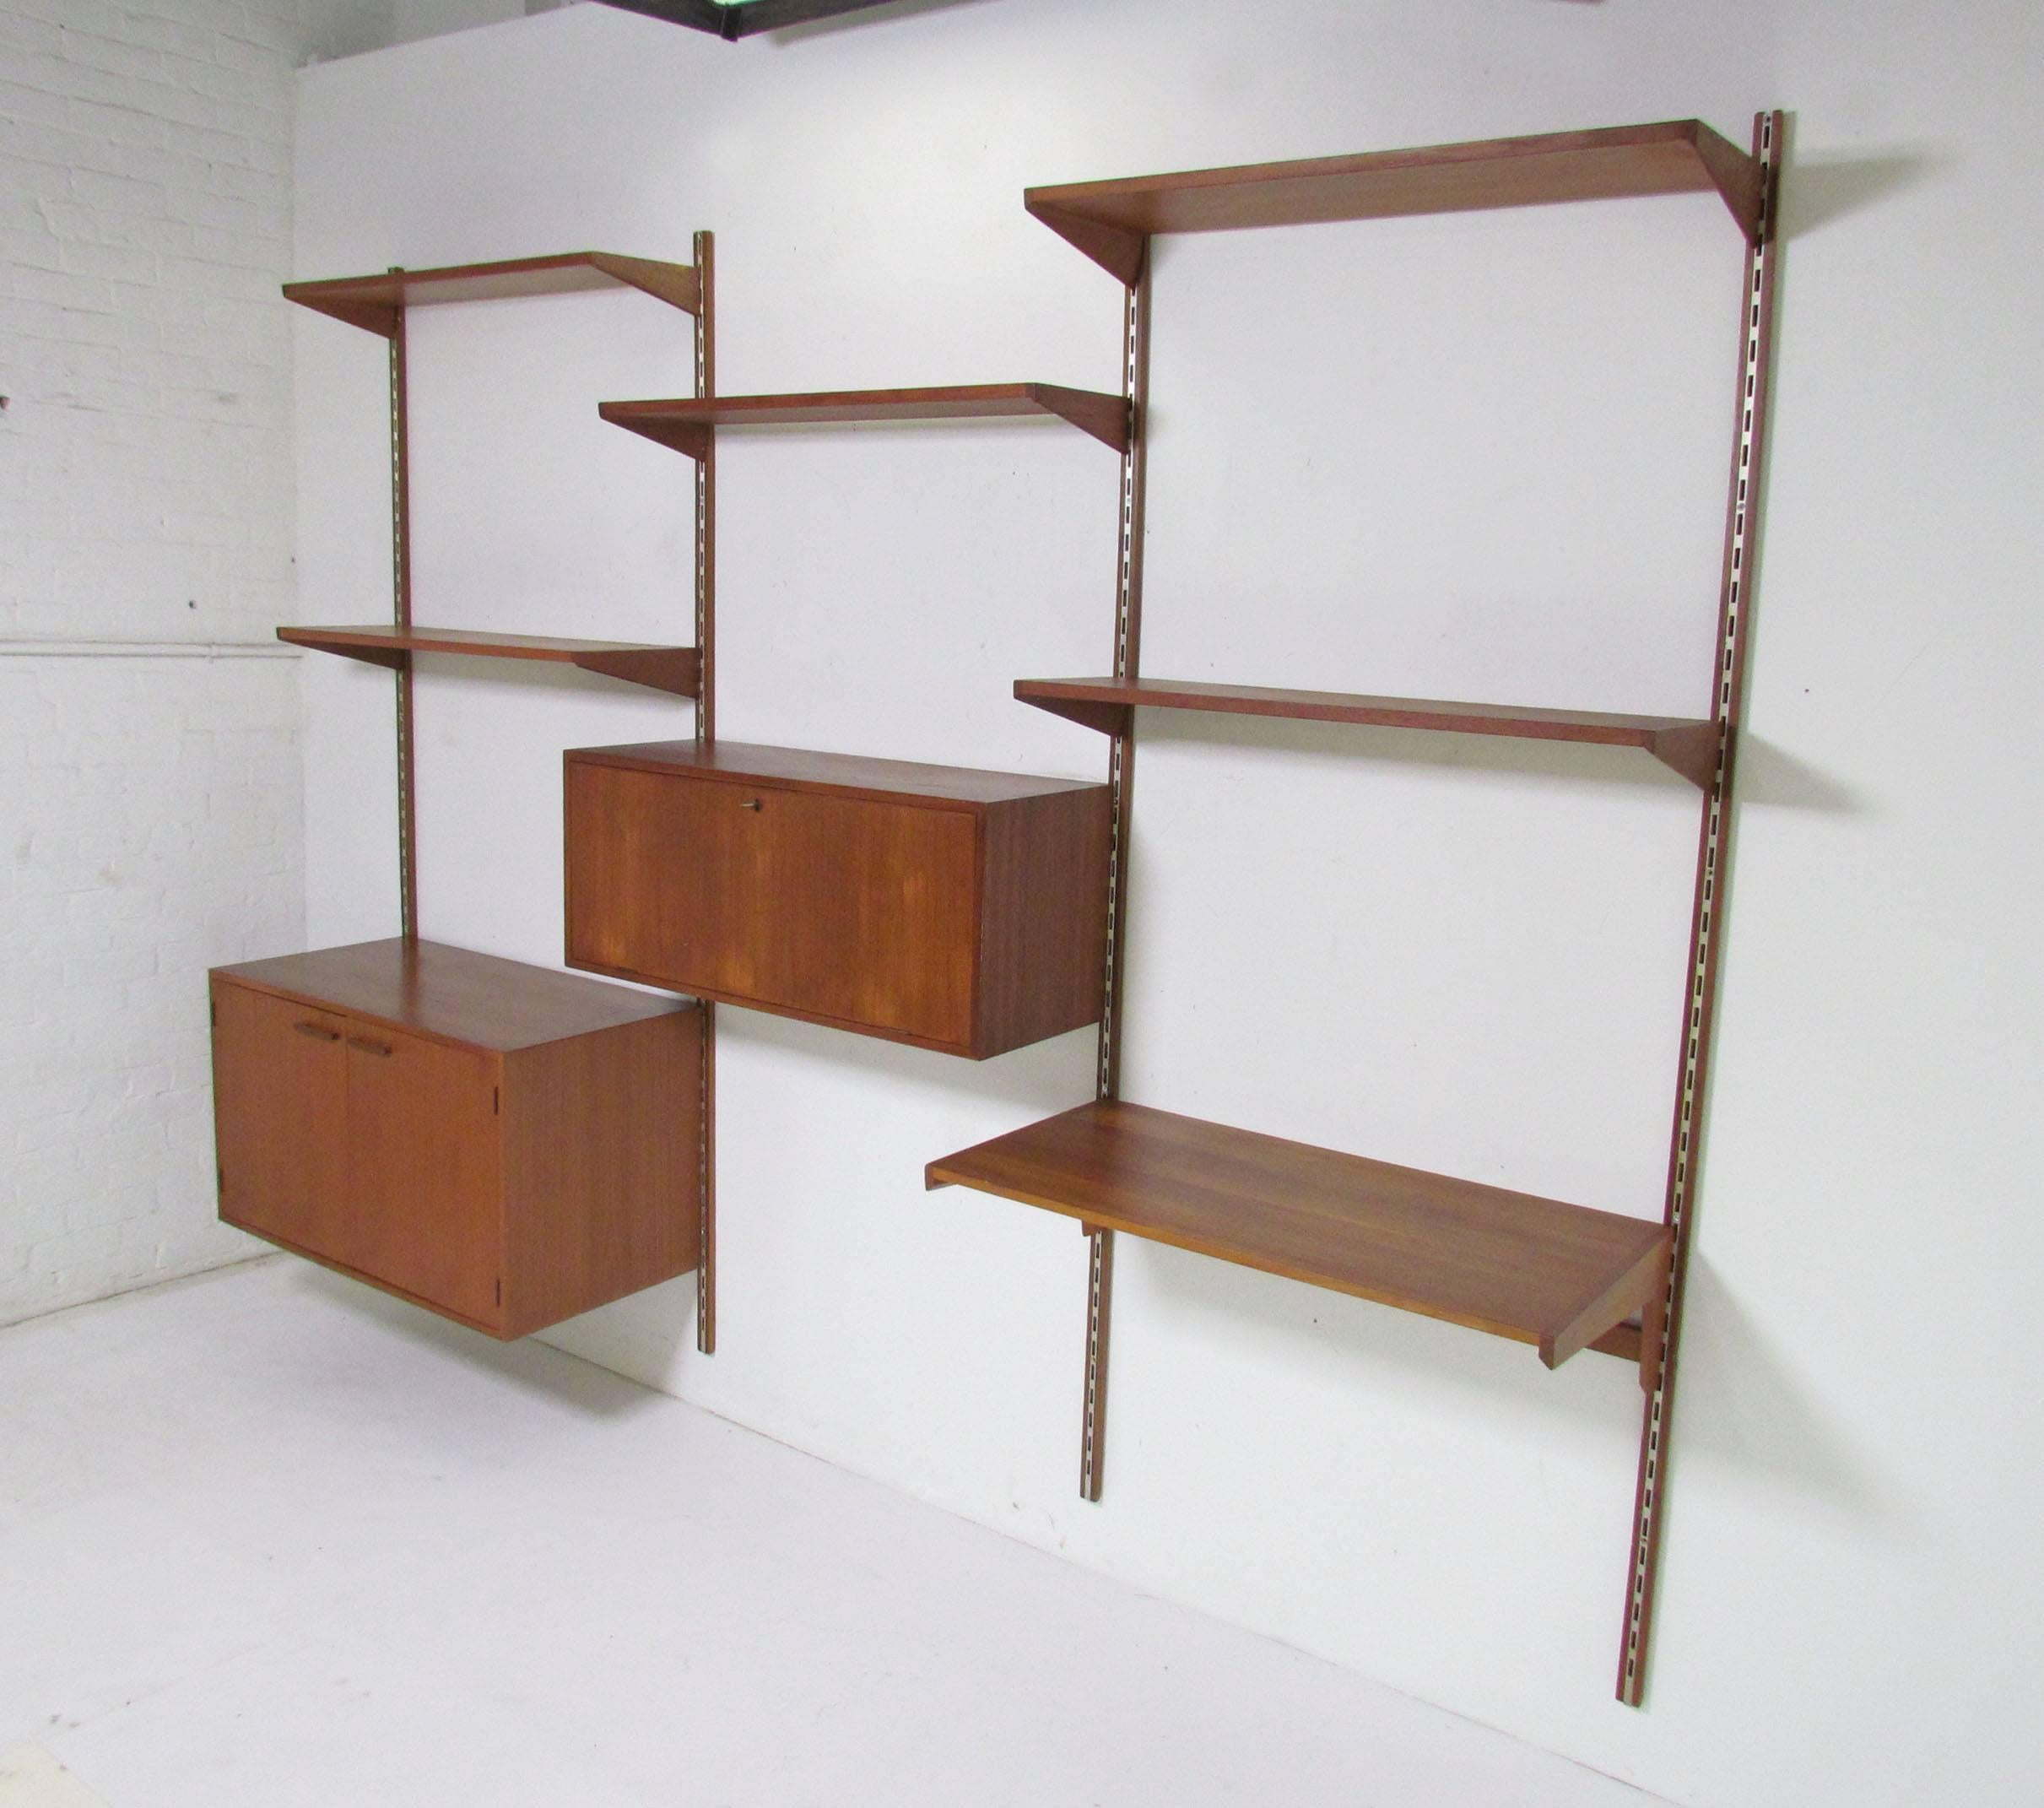 Danish teak wall-mounted shelving unit designed by Kai Kristiansen for Fornem Møbelkunst, circa early 1960s. Three bay unit consists of a desk top, a two-door cabinet with ample interior storage, and a drop-front cabinet with additional storage, as